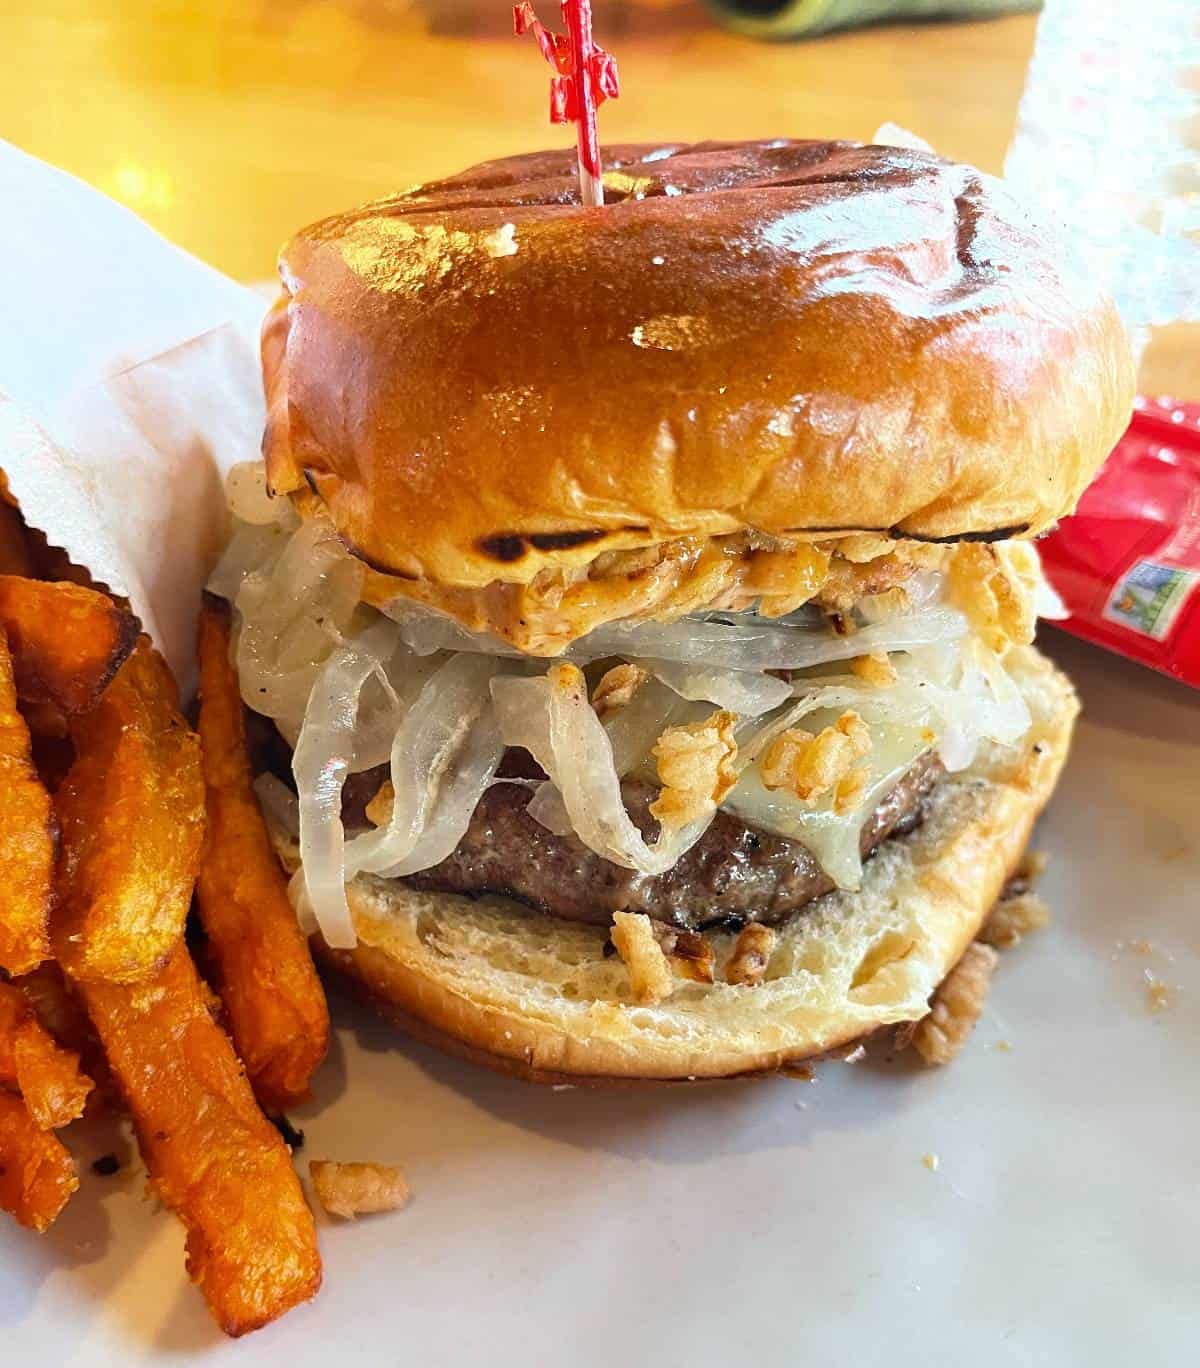 A cheeseburger on a bun, with sautéed onions and a side of sweet potato fries.